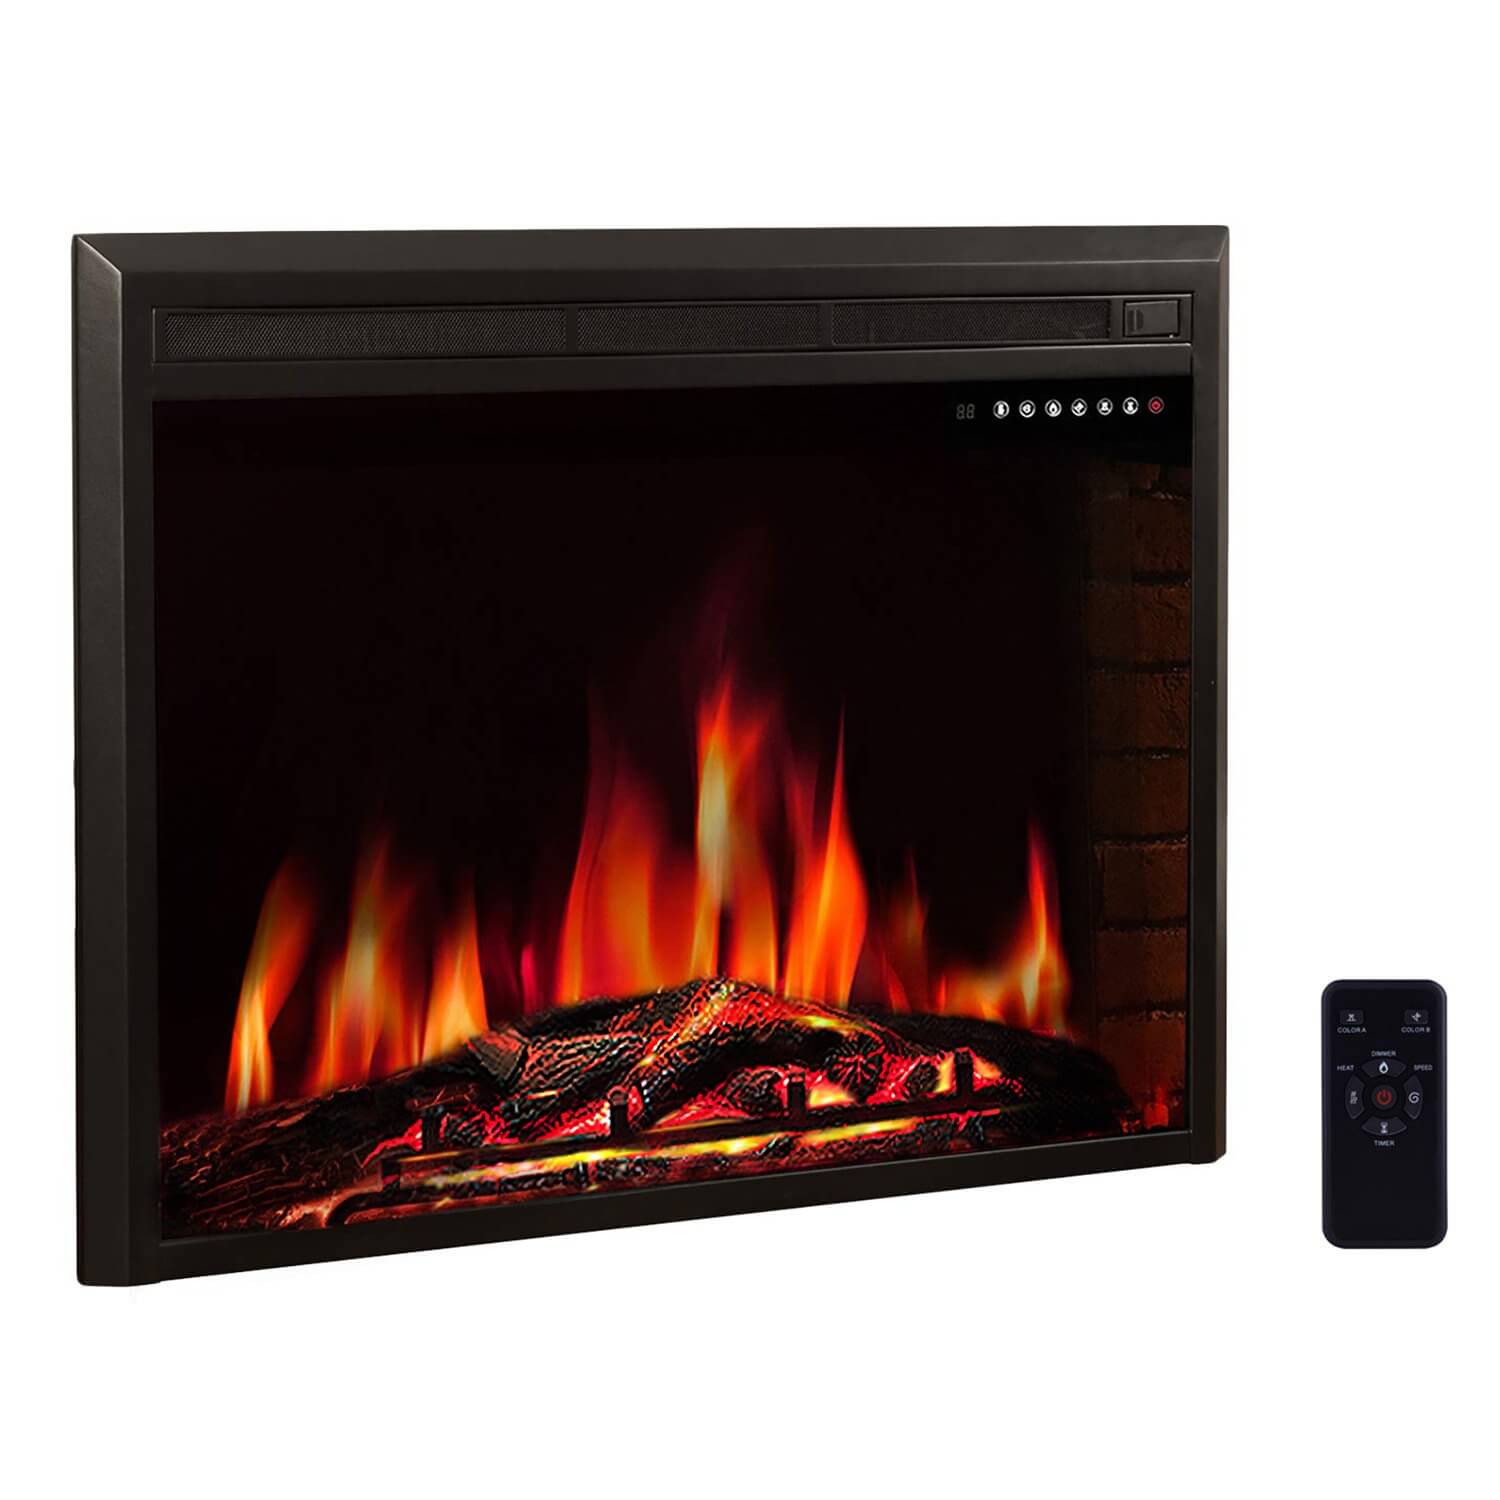 R.W.FLAME 39" Freestanding & Recessed Electric Fireplace Insert, 750W-1500W